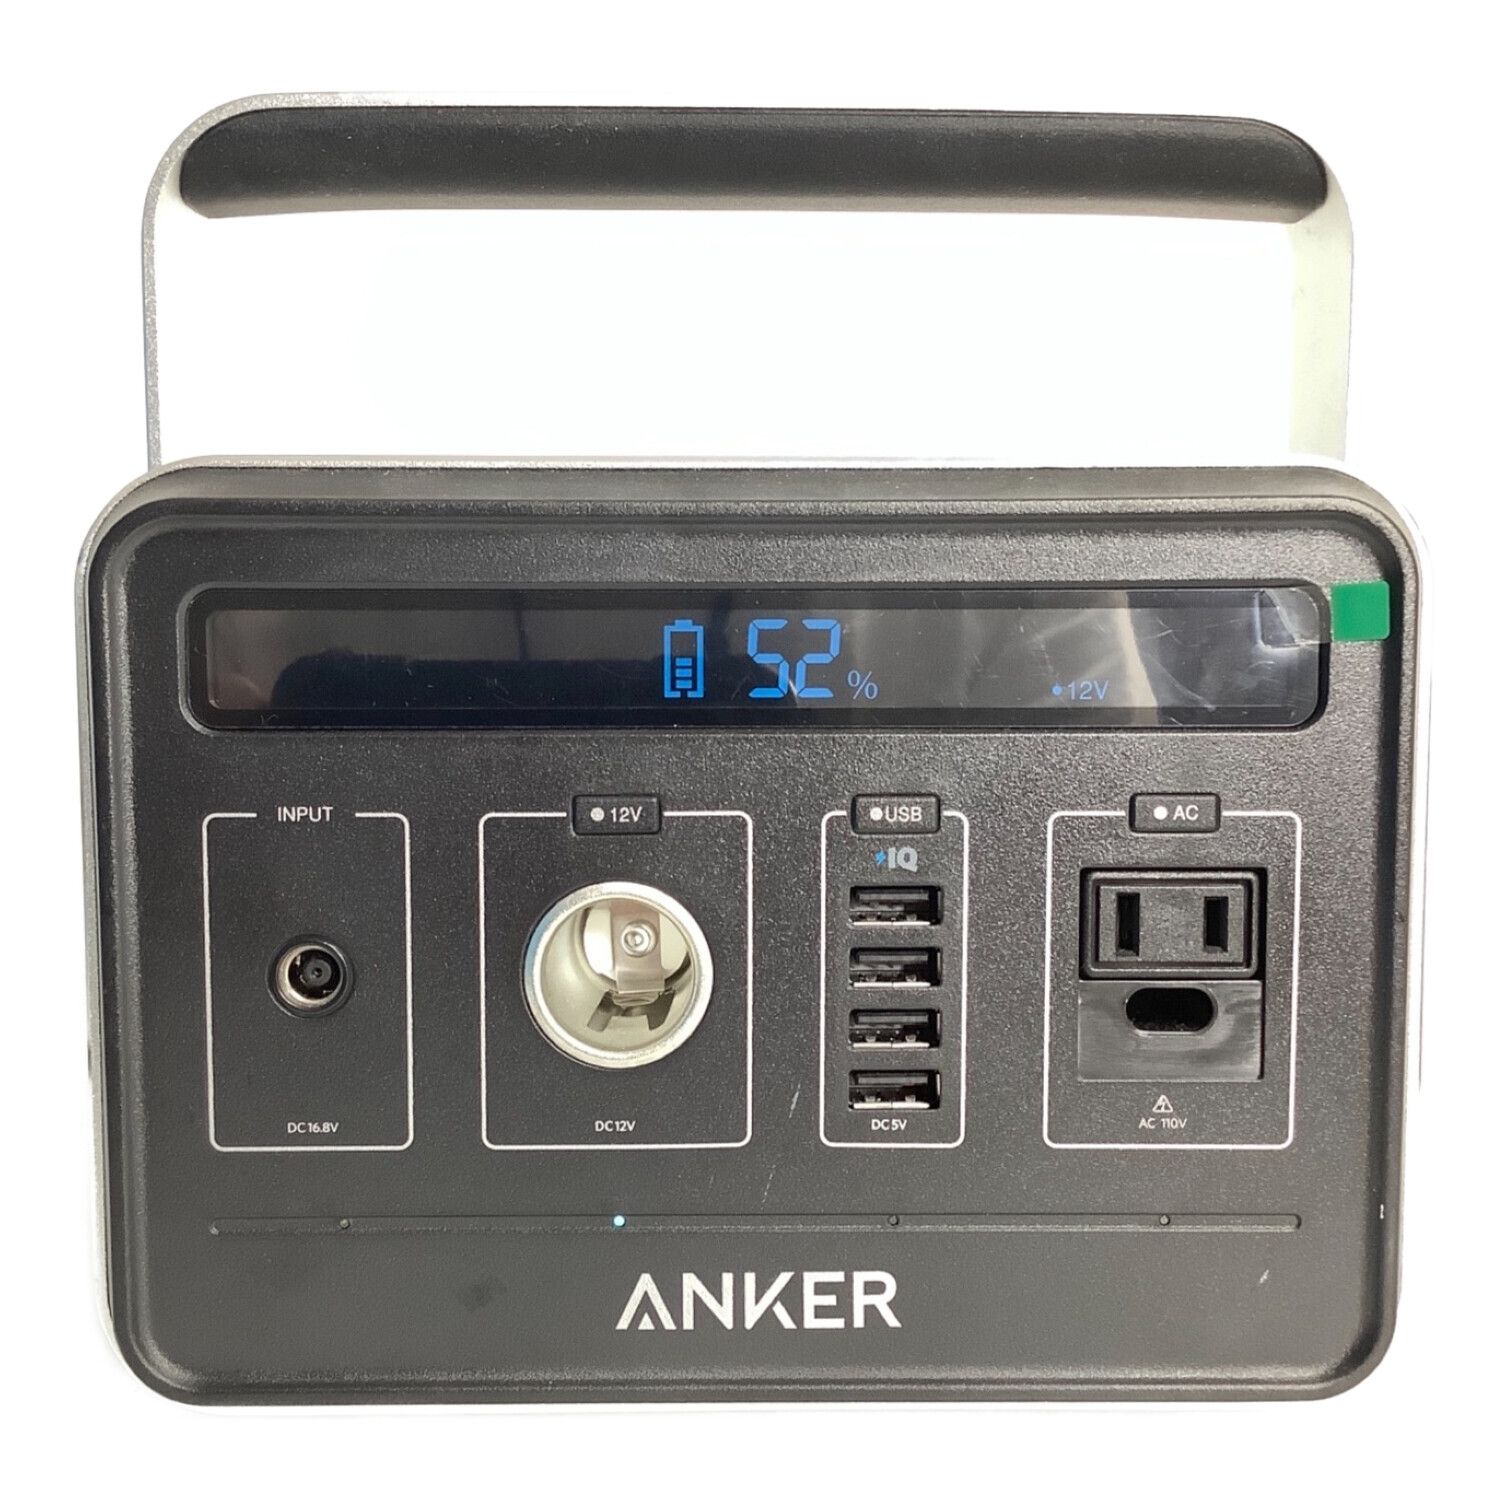 Anker (アンカー) ポータブル電源 Power House 通電確認済 A1701511